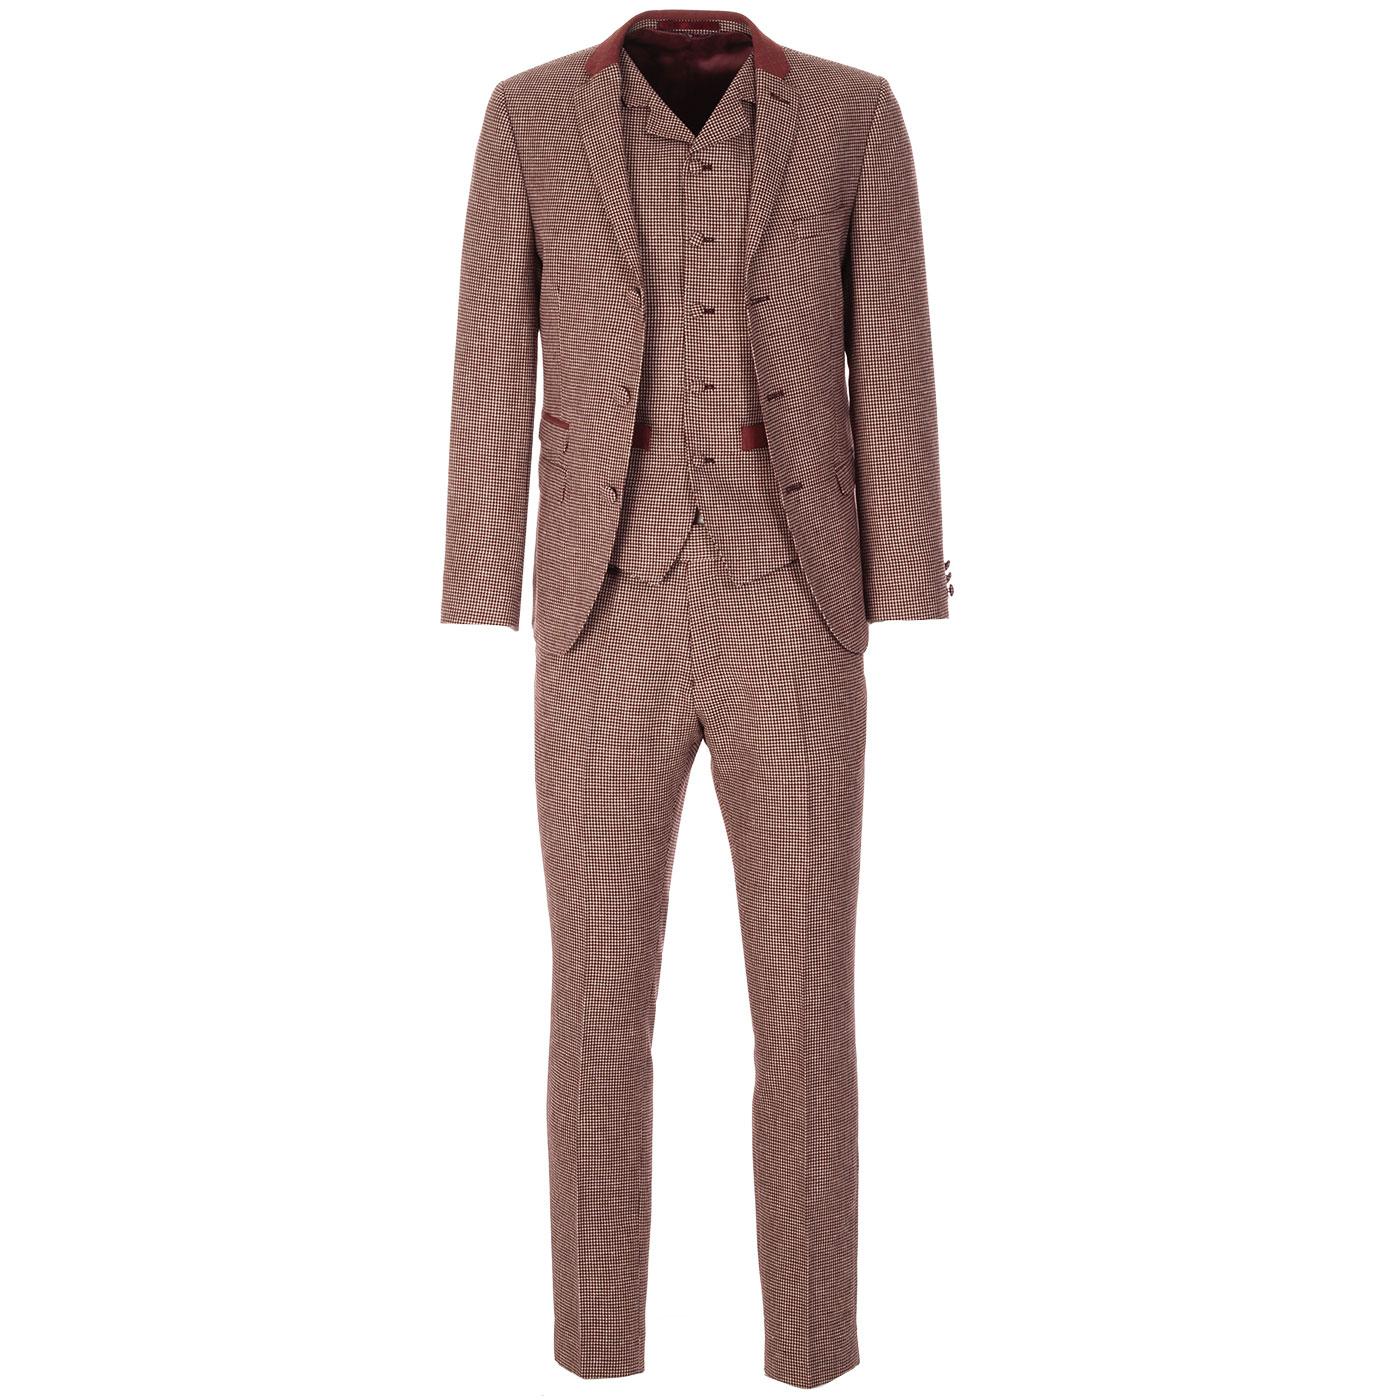 MADCAP ENGLAND 60s Mod 2/3 Piece Suit in Dogtooth